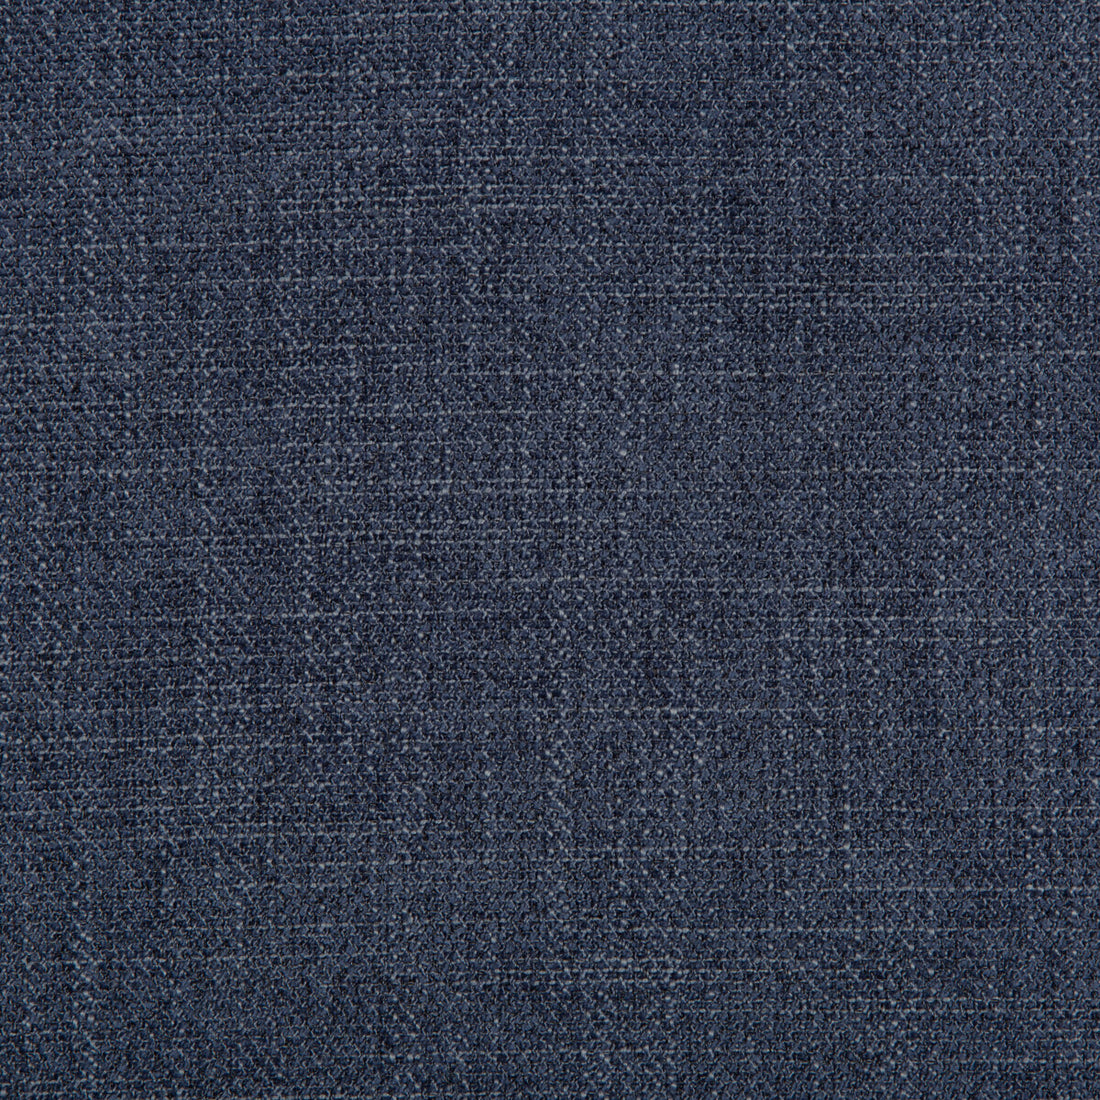 Kravet Contract fabric in 35404-5 color - pattern 35404.5.0 - by Kravet Contract in the Crypton Incase collection